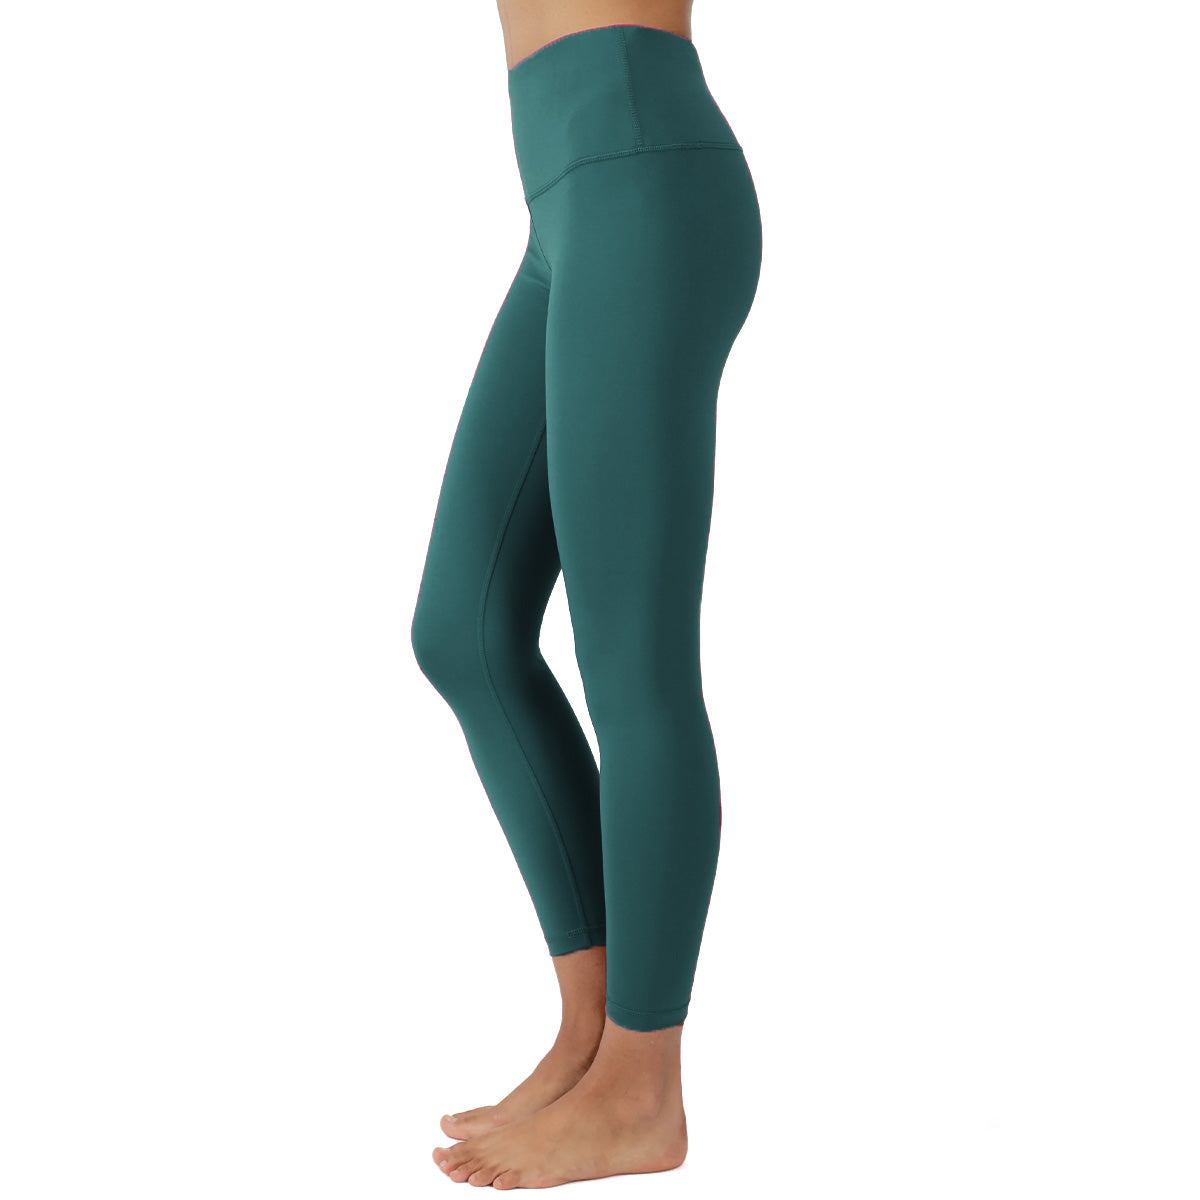 Yogalicious Lux Leggings High Waist Ankle Length Style AY76816 Large Tucson  Teal